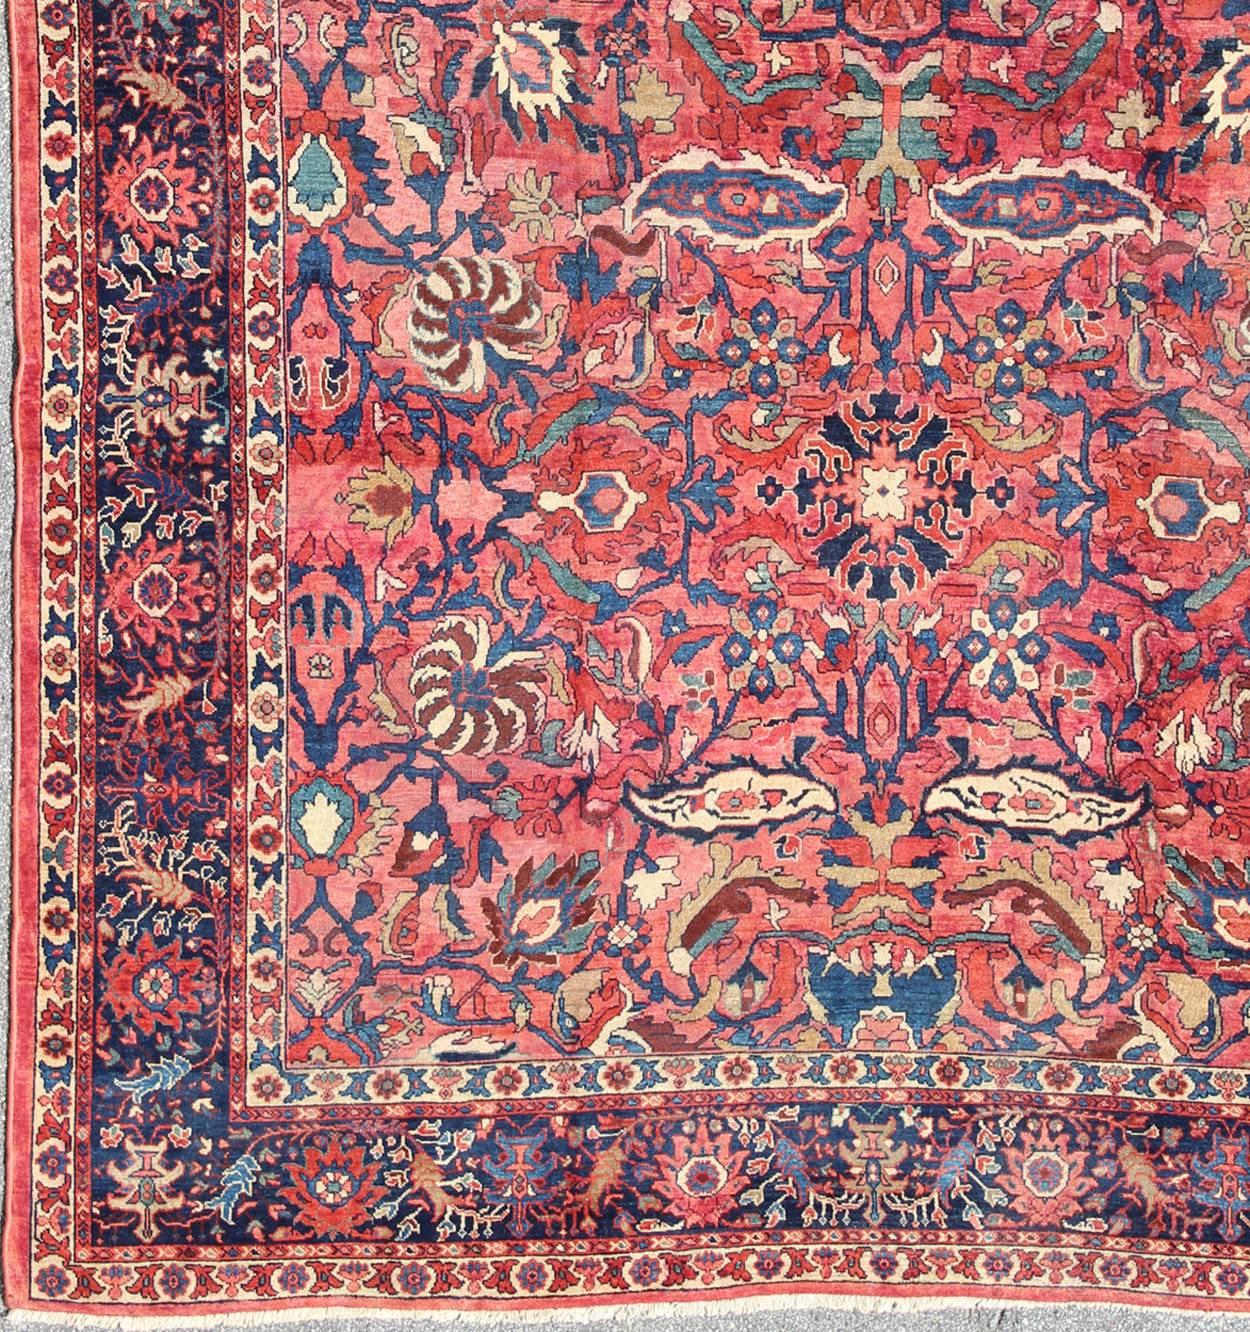 Antique Persian Sultanabad rug with Large Palmettes and flowers in rose red. Pinkish red and Blue. 11-20207, 10'8 x 14'8 Antique Persian. This antique Persian Sultanabad from 1900s relies heavily on exquisite details as well as large-scale flowers